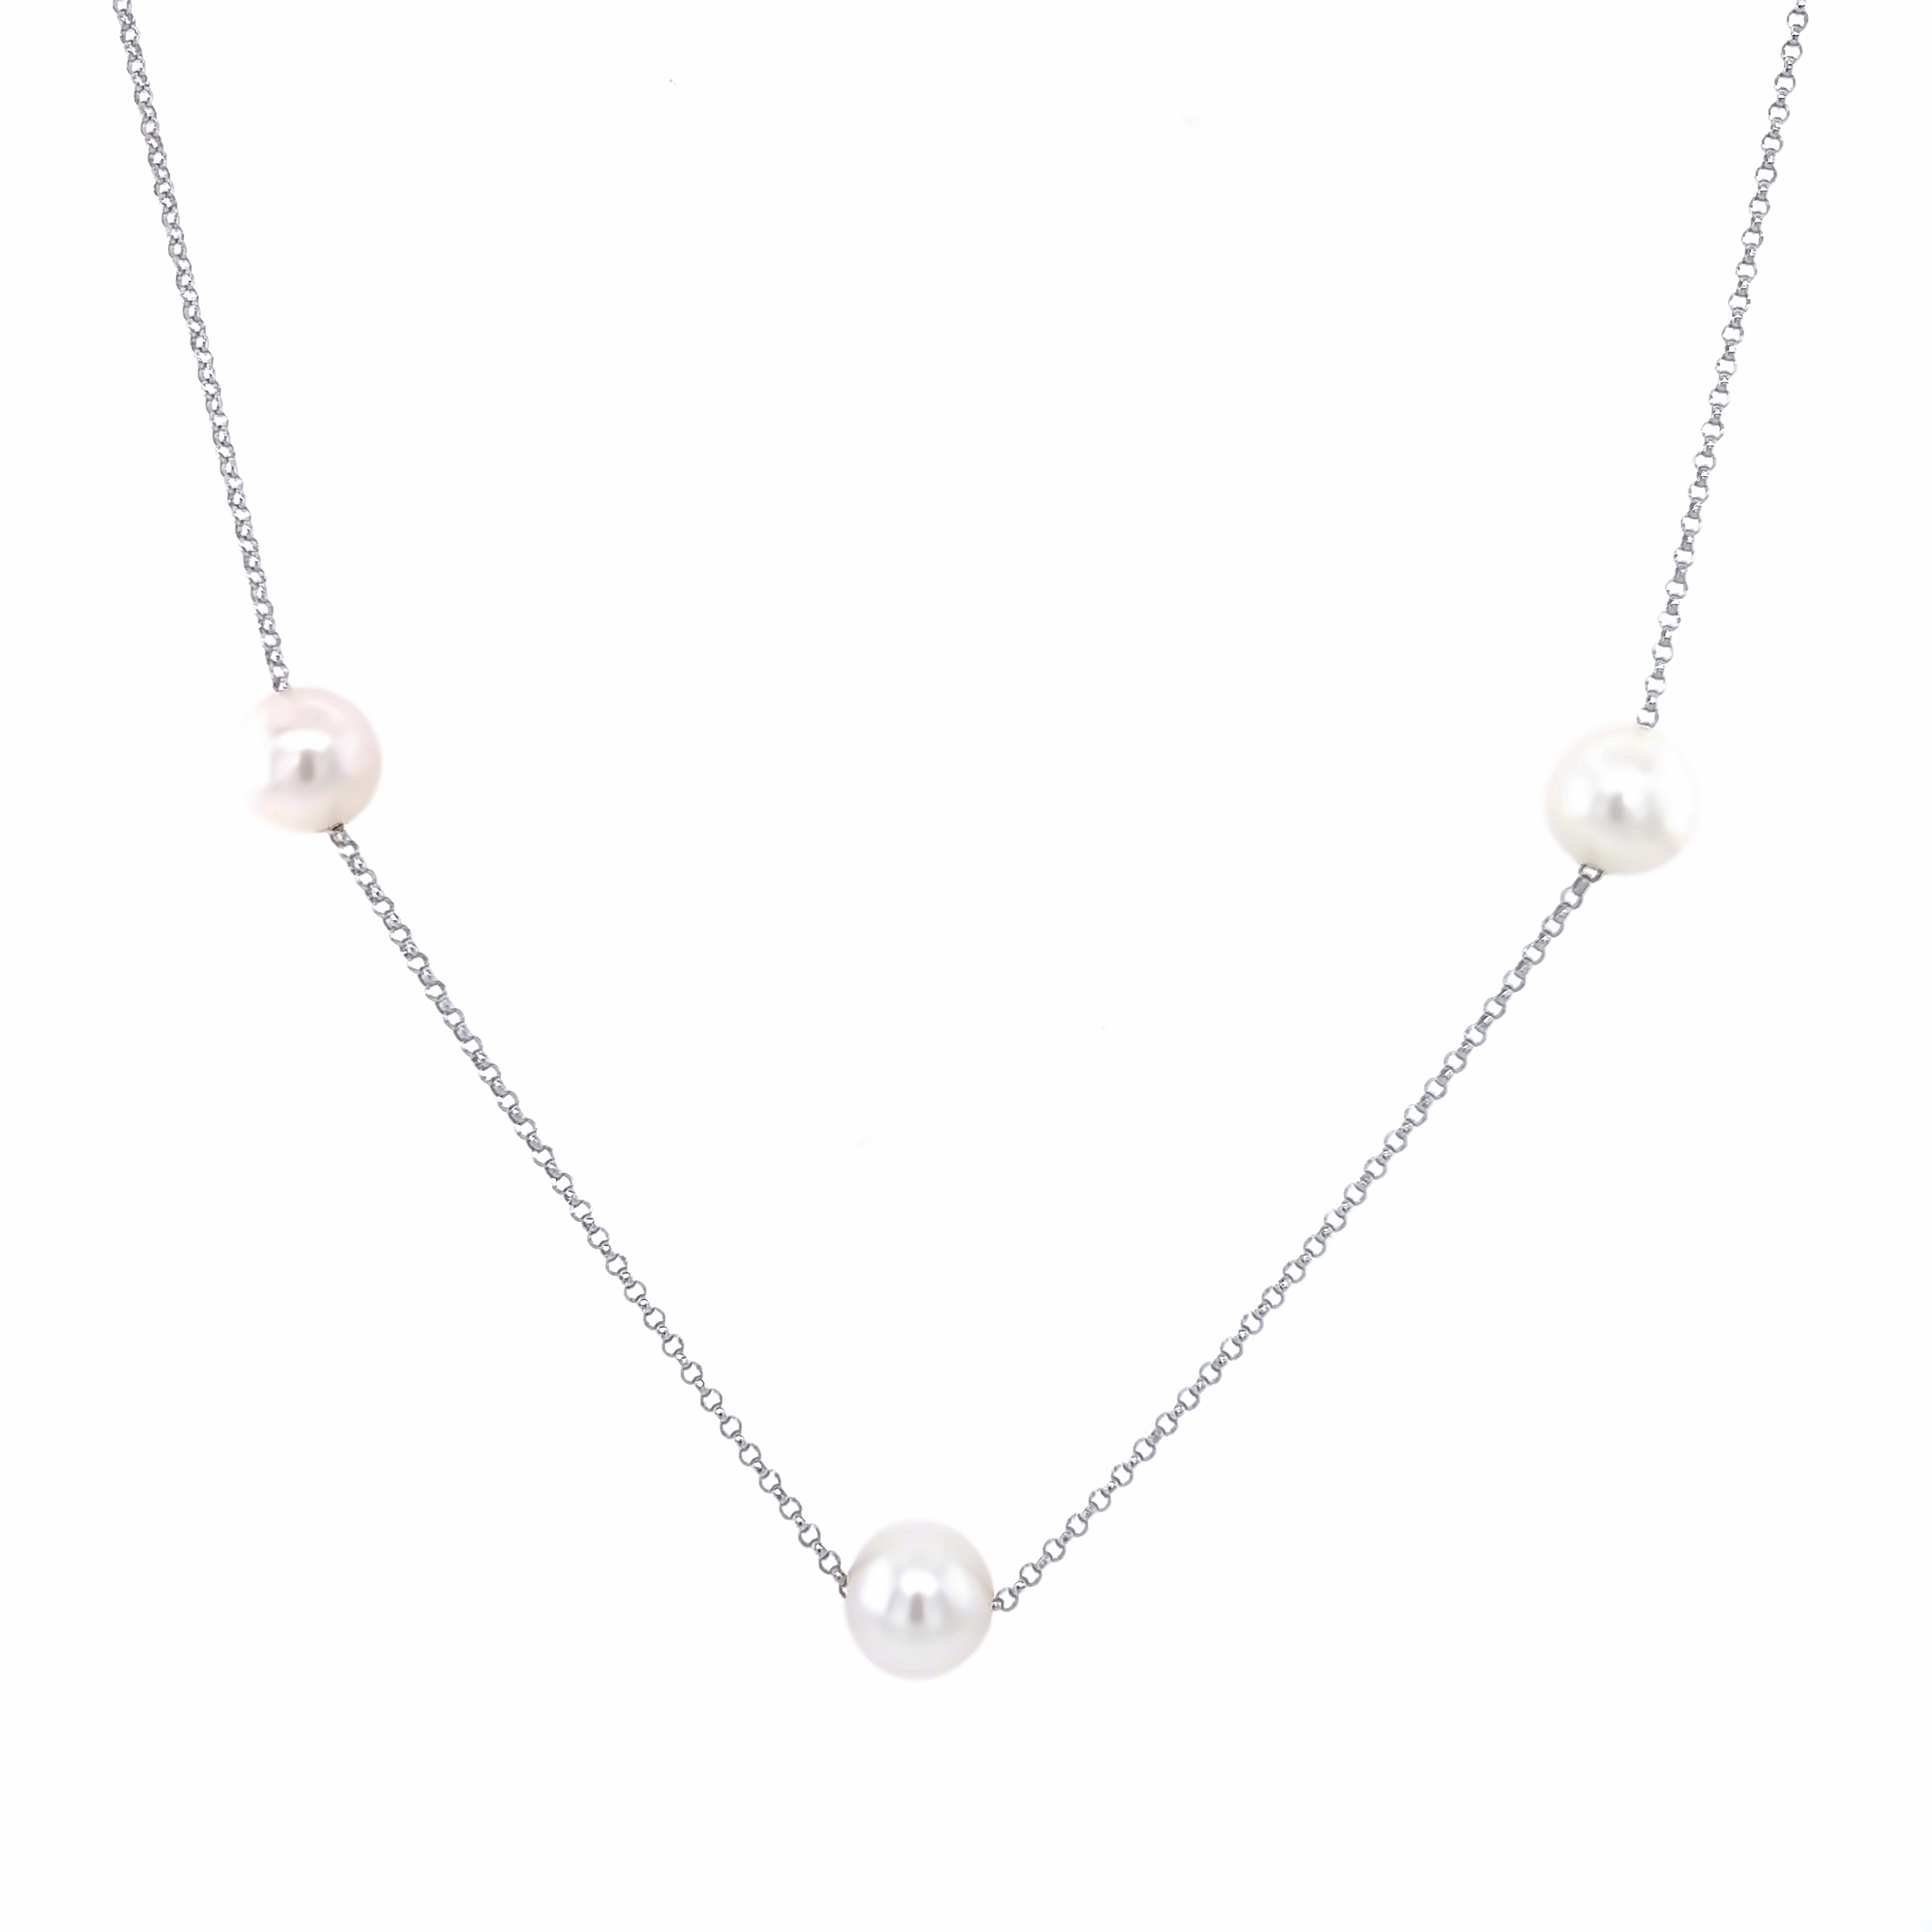 14 Karat white gold tin cup necklace with 9=6.00-7.00mm Fresh Water Pearls.